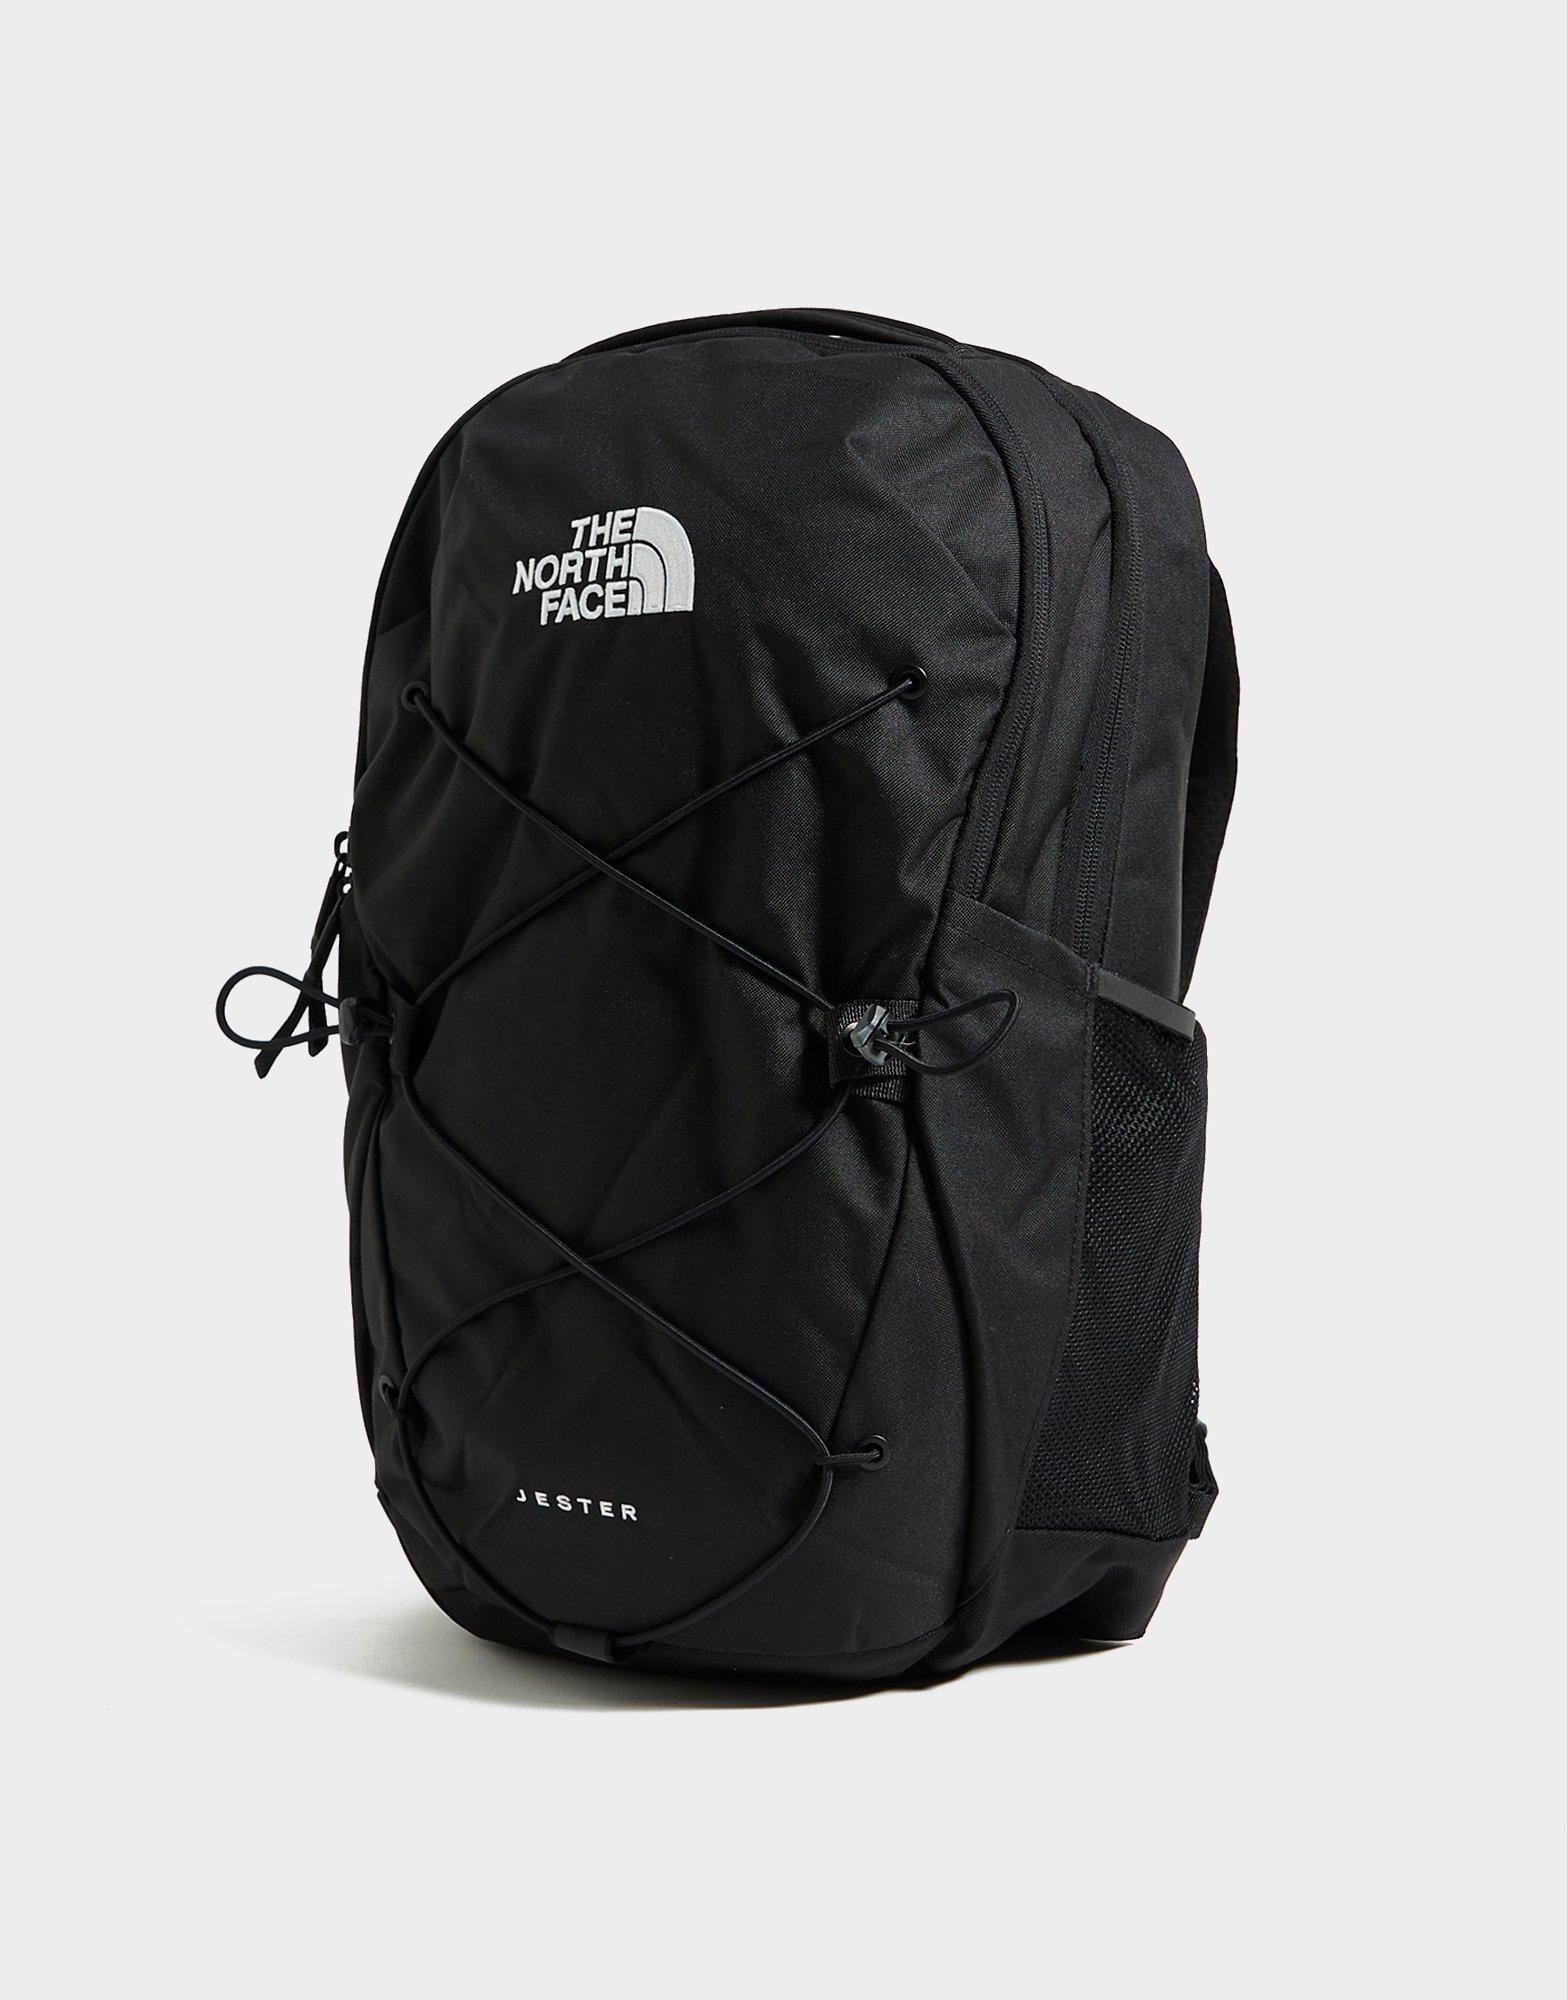 the north face jester backpack in black 